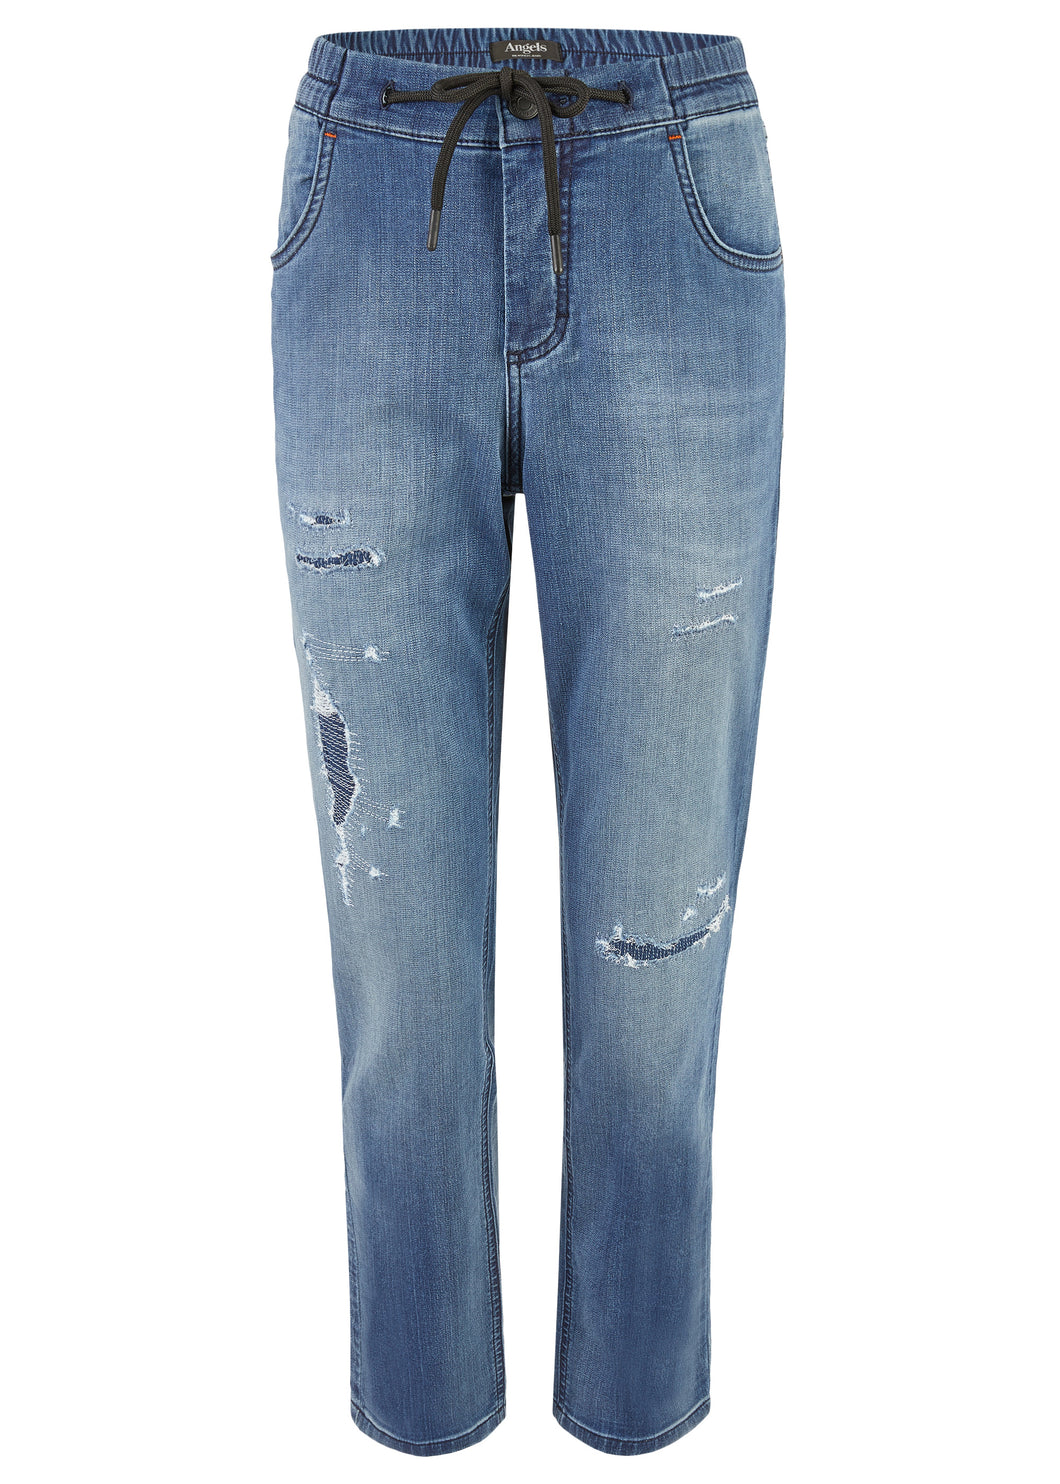 ANGELS JEANS LOUISA ACTIVE MID BLUE USED DEST